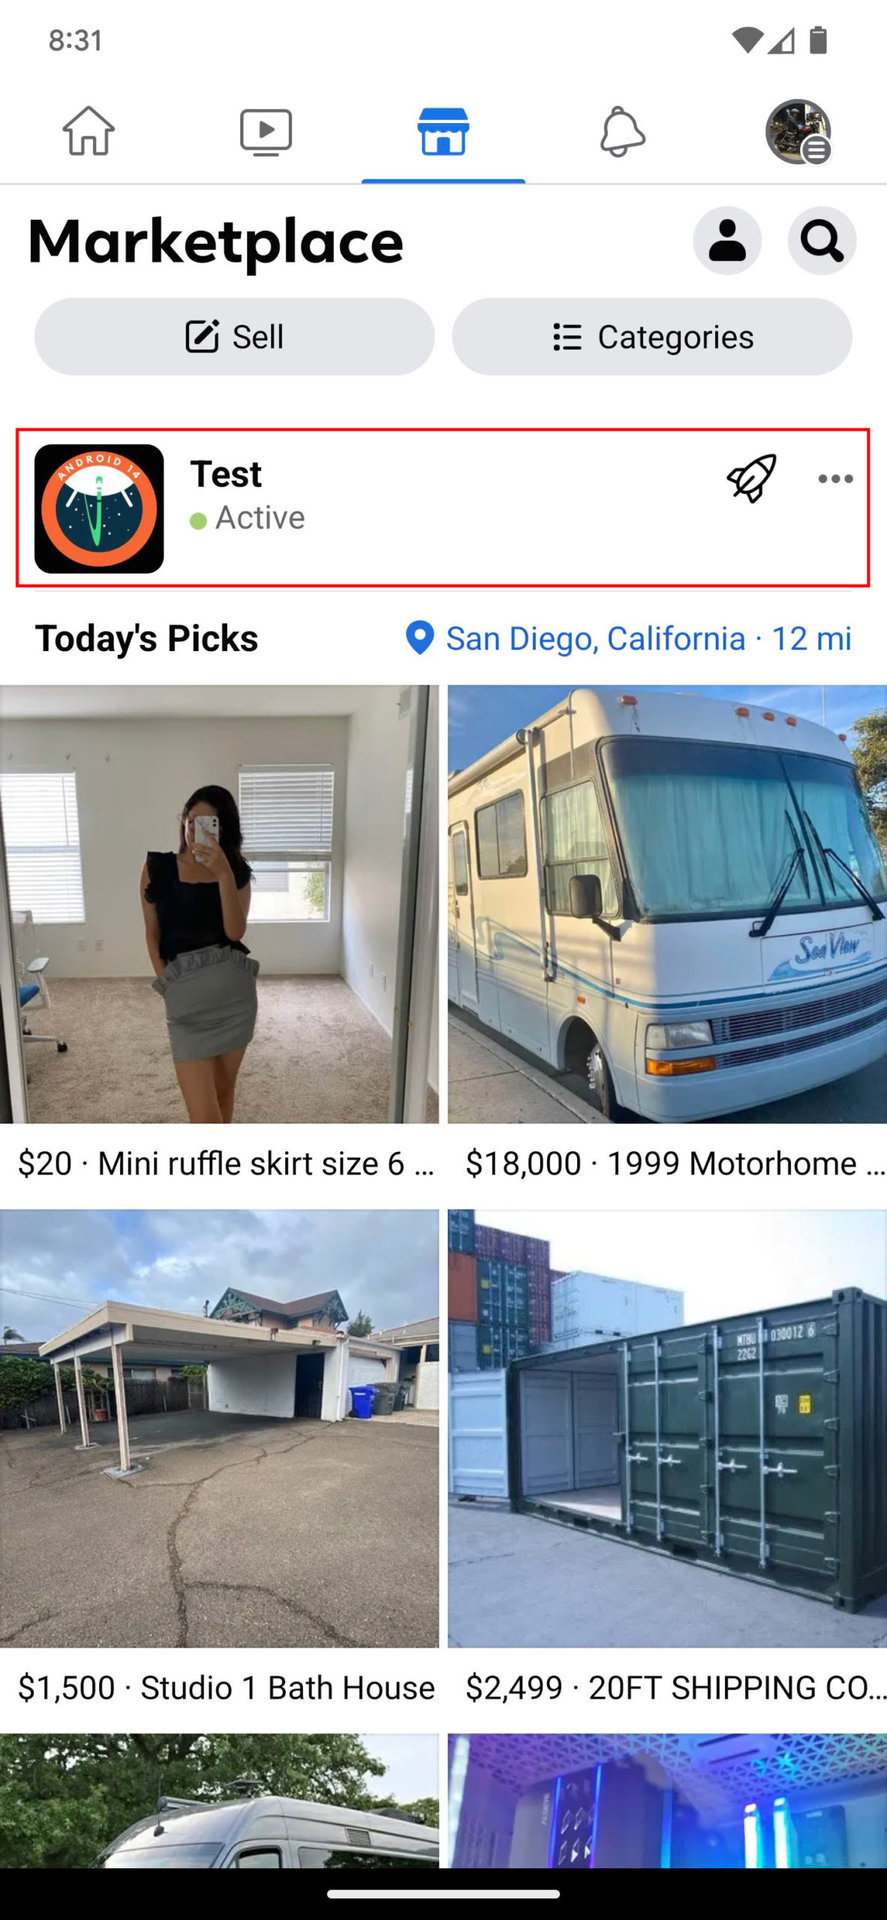 How tp publish a listing on Facebook Marketplace on mobile 8